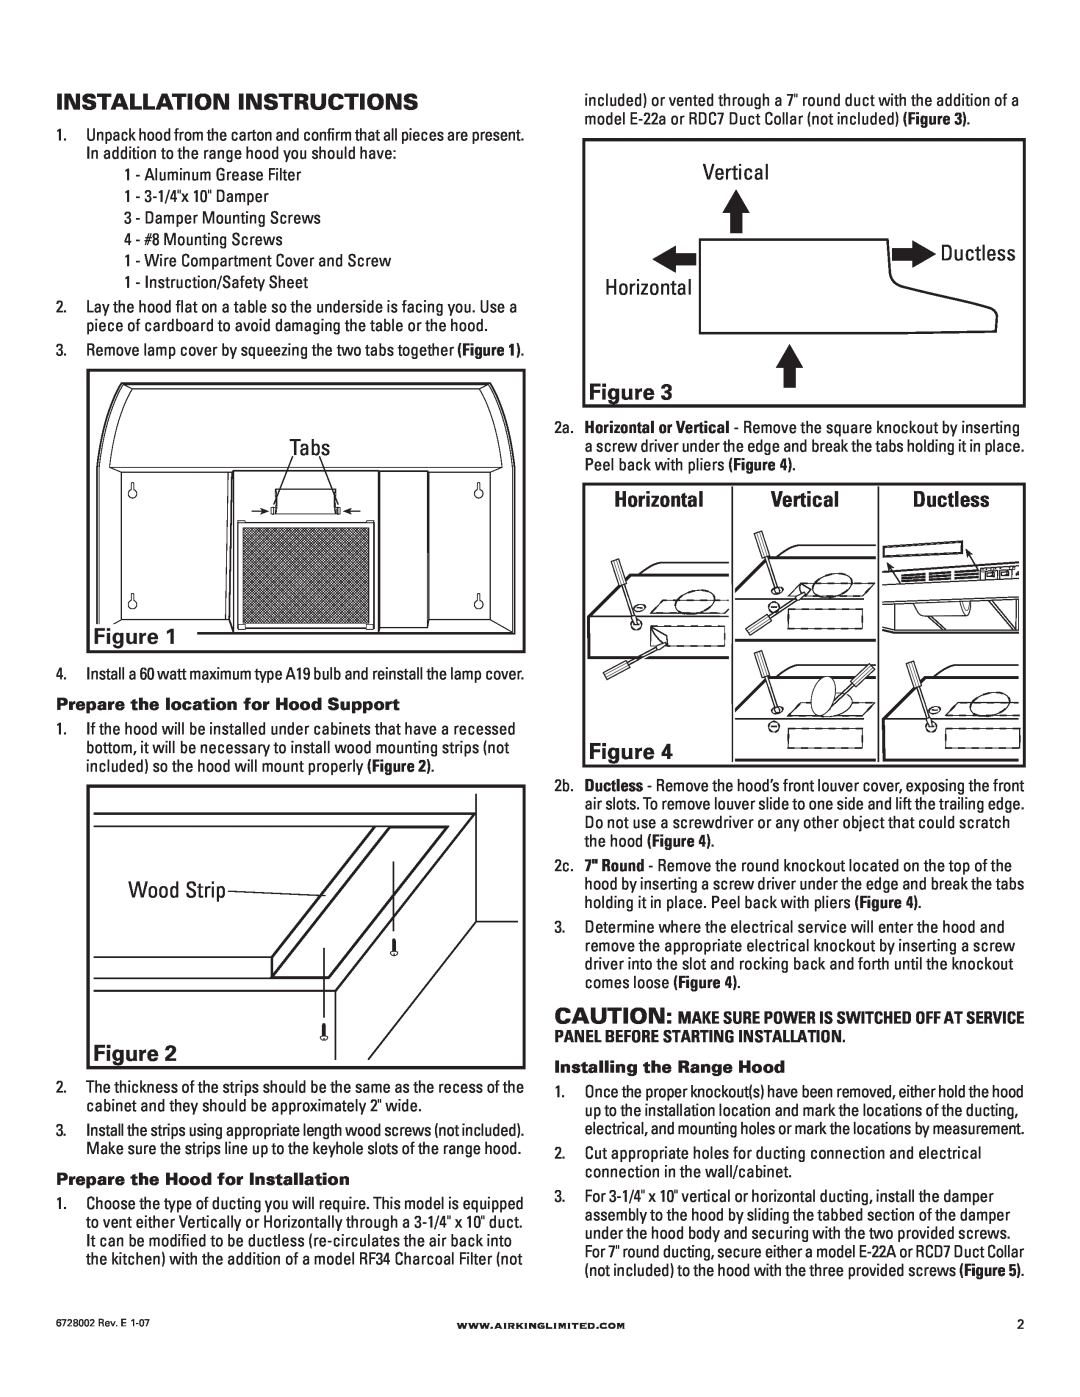 Air King Ventilation Hood manual Installation Instructions, Tabs, Vertical, Horizontal, Wood Strip, Ductless 